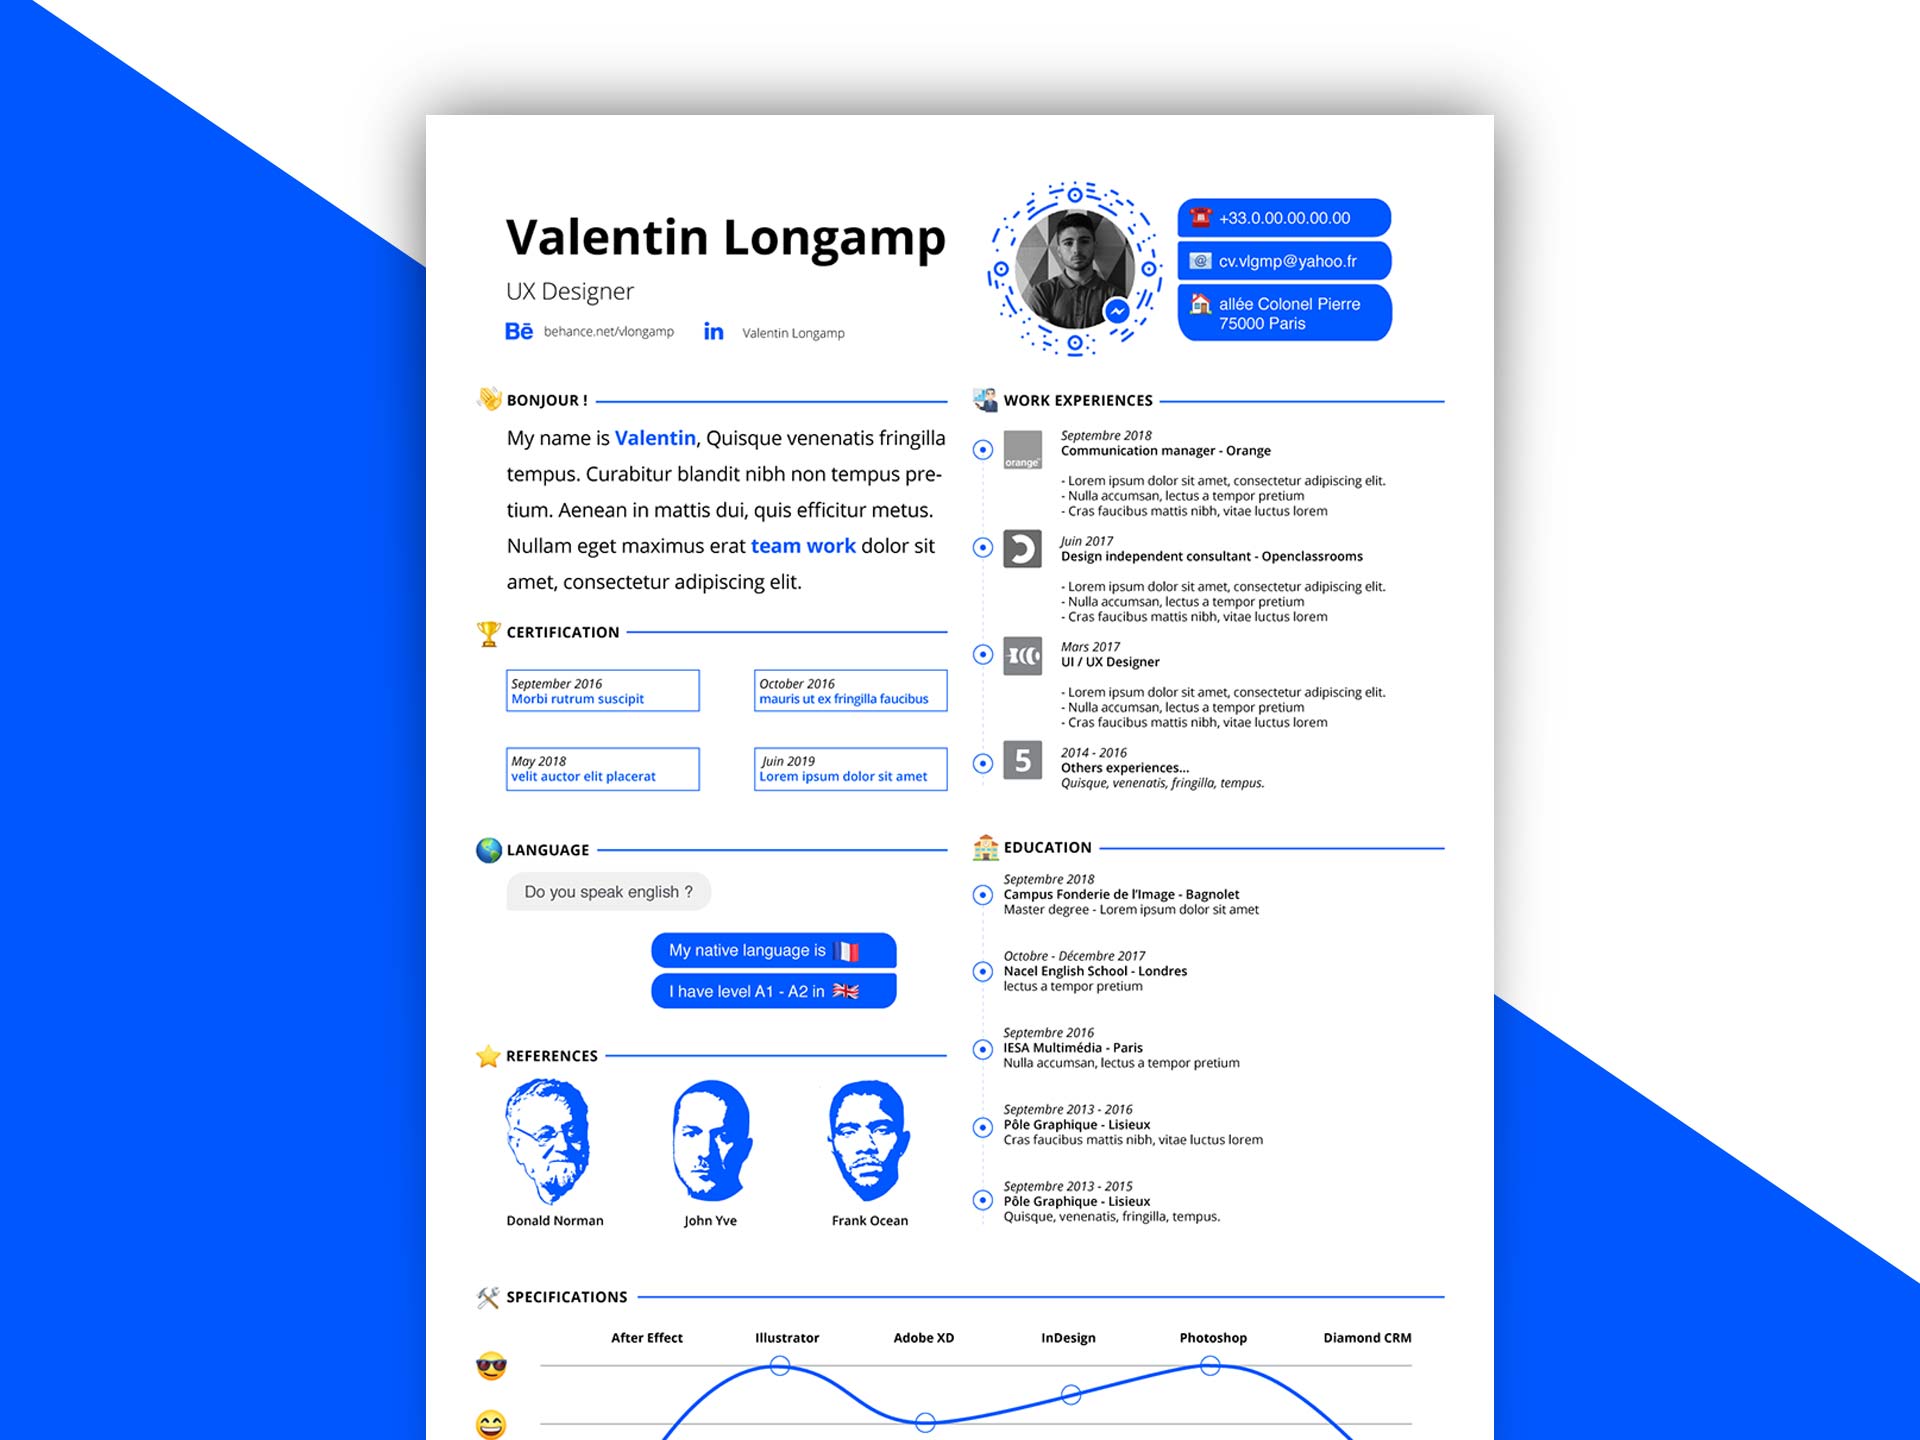 free resume templates for indesign